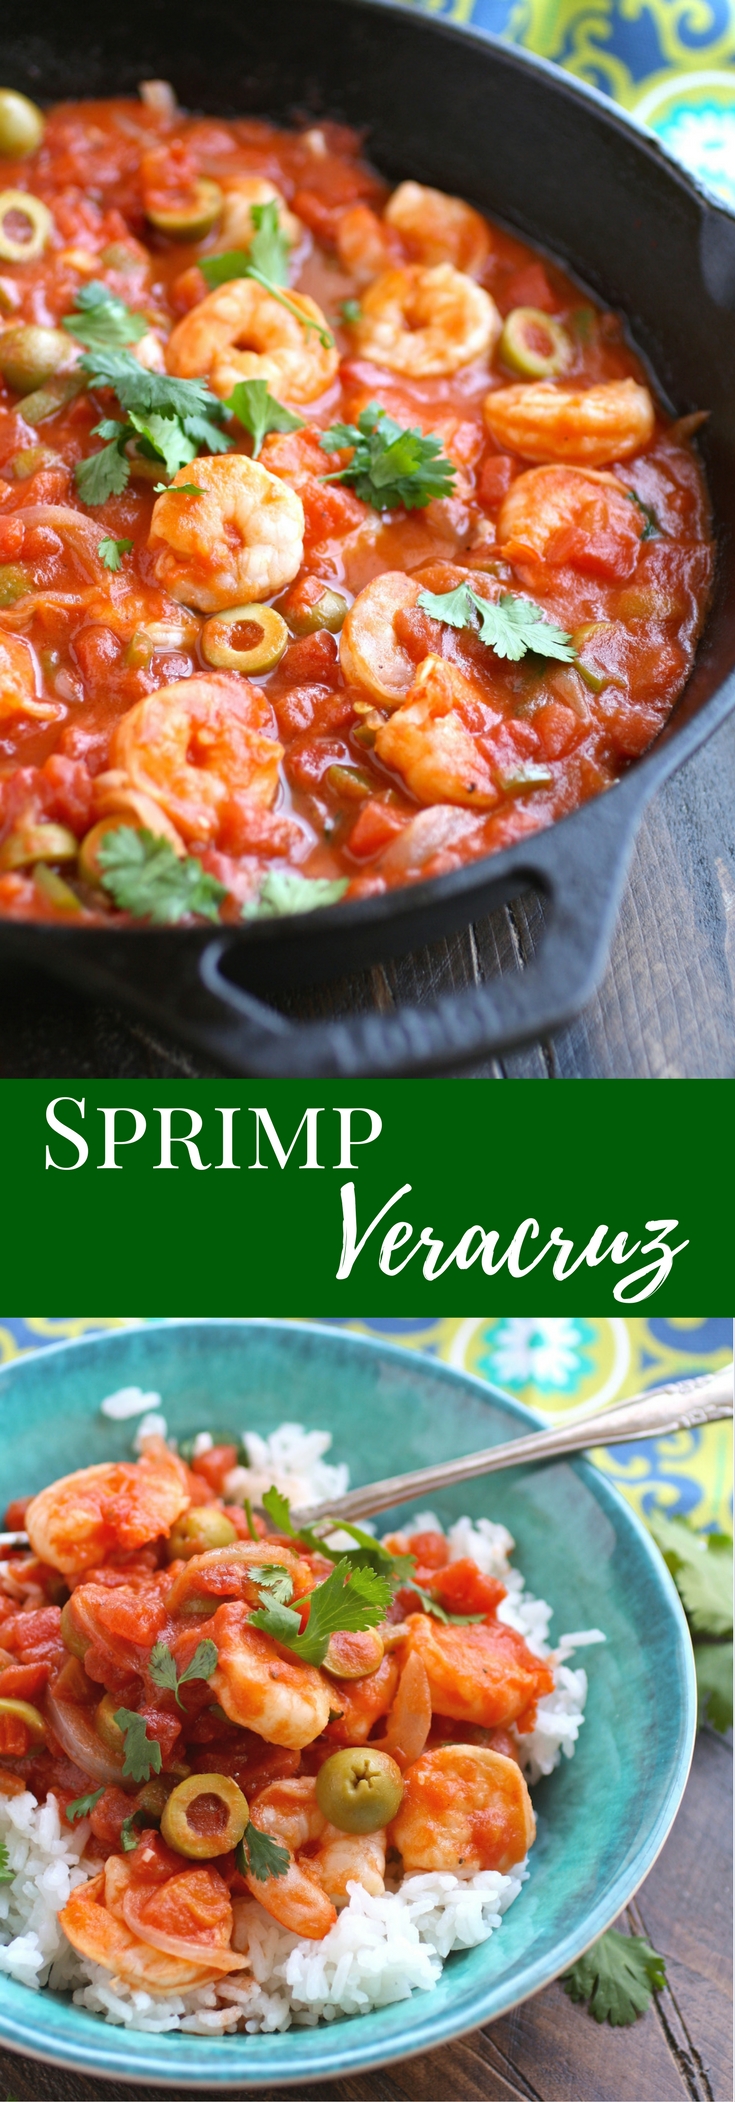 Shrimp Veracruz is a delicious and easy one-pan meal to make any night of the week. It's big on flavor and color!